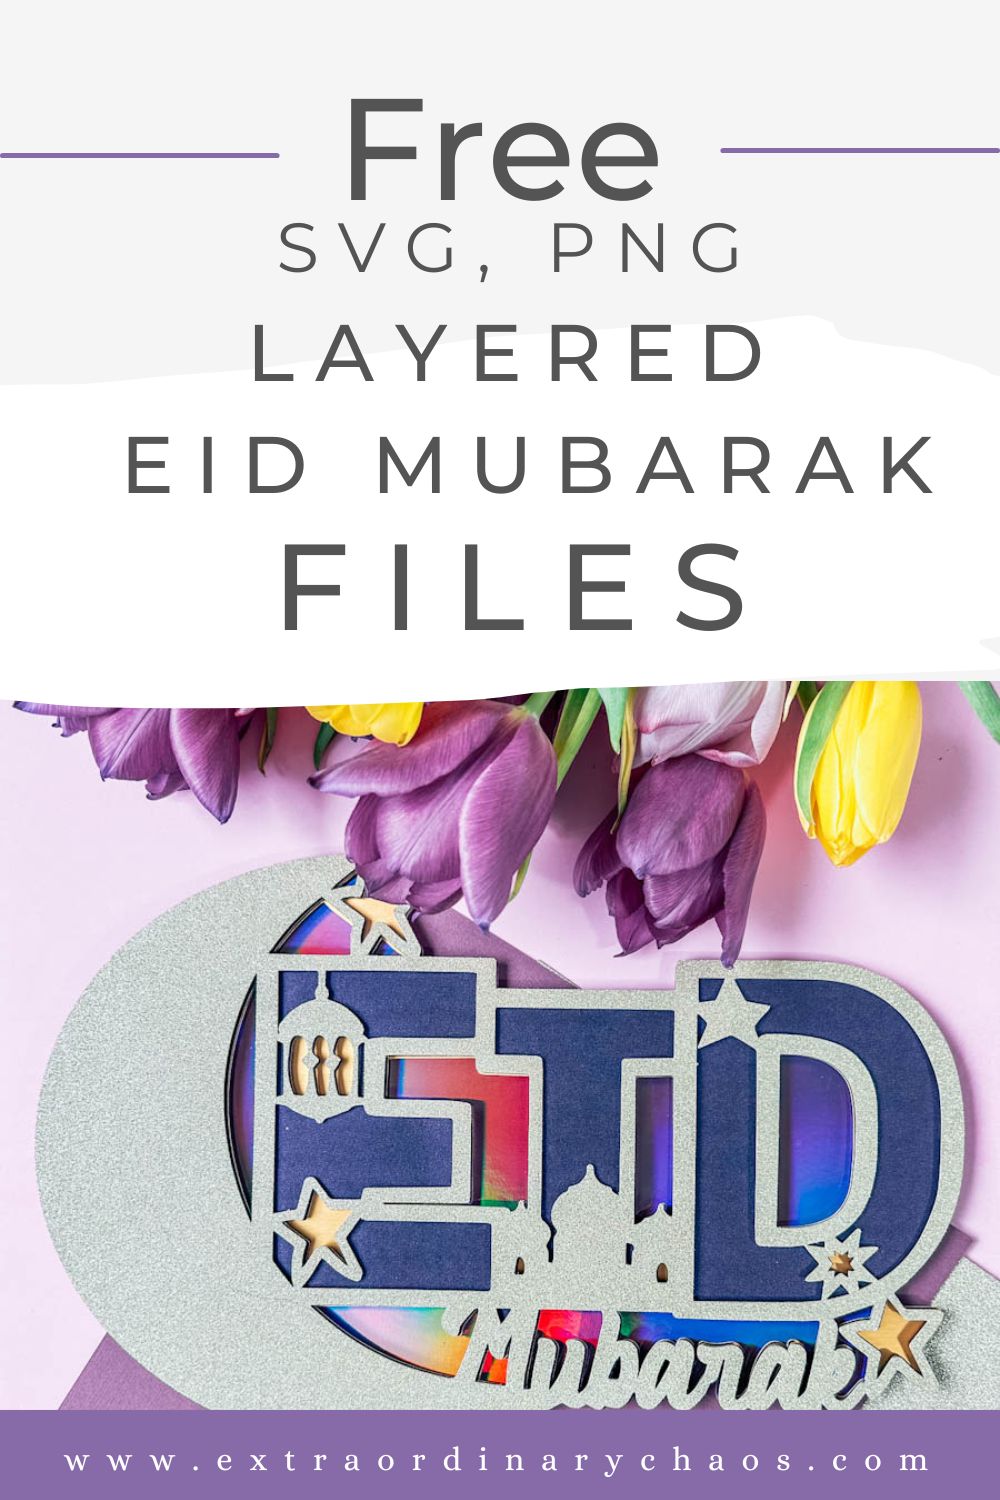 Free SVG PNG layered Eid Mubarak files for crafts with Cricut, Silhouette, xTool and Glowforge